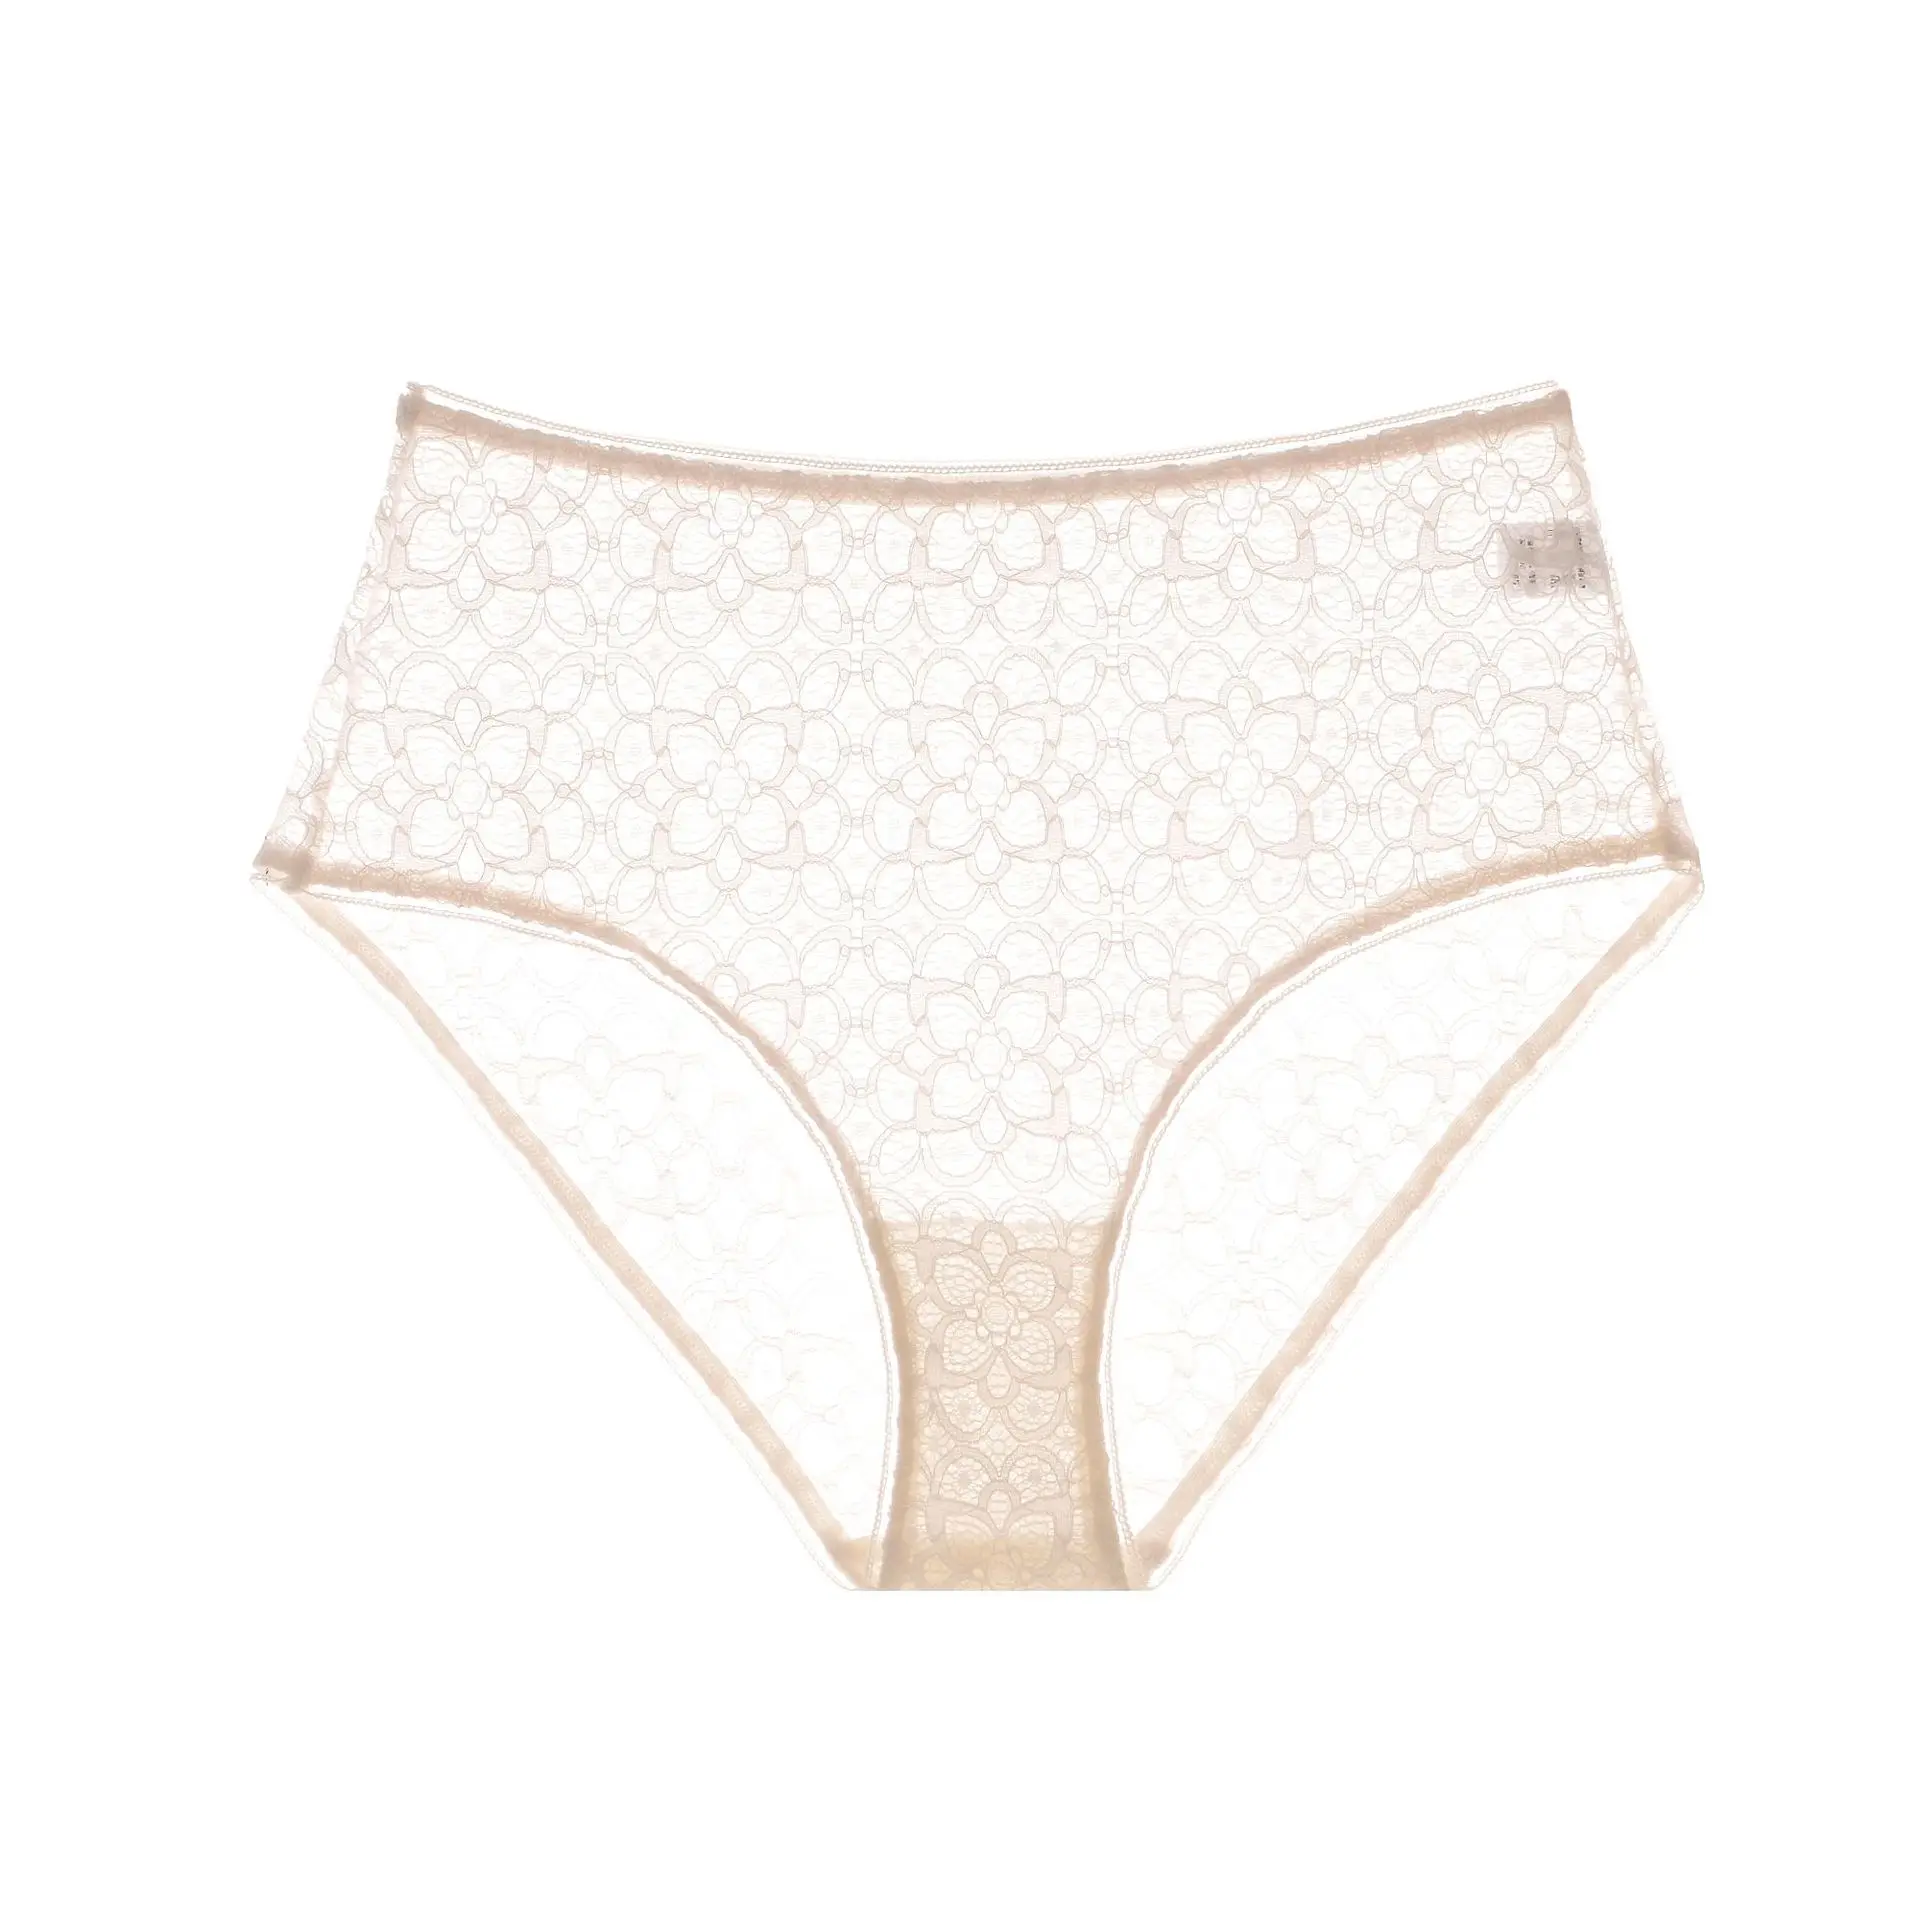 Women's underwear with classic high waisted design of mulberry silk lining and transparent and exquisite lace